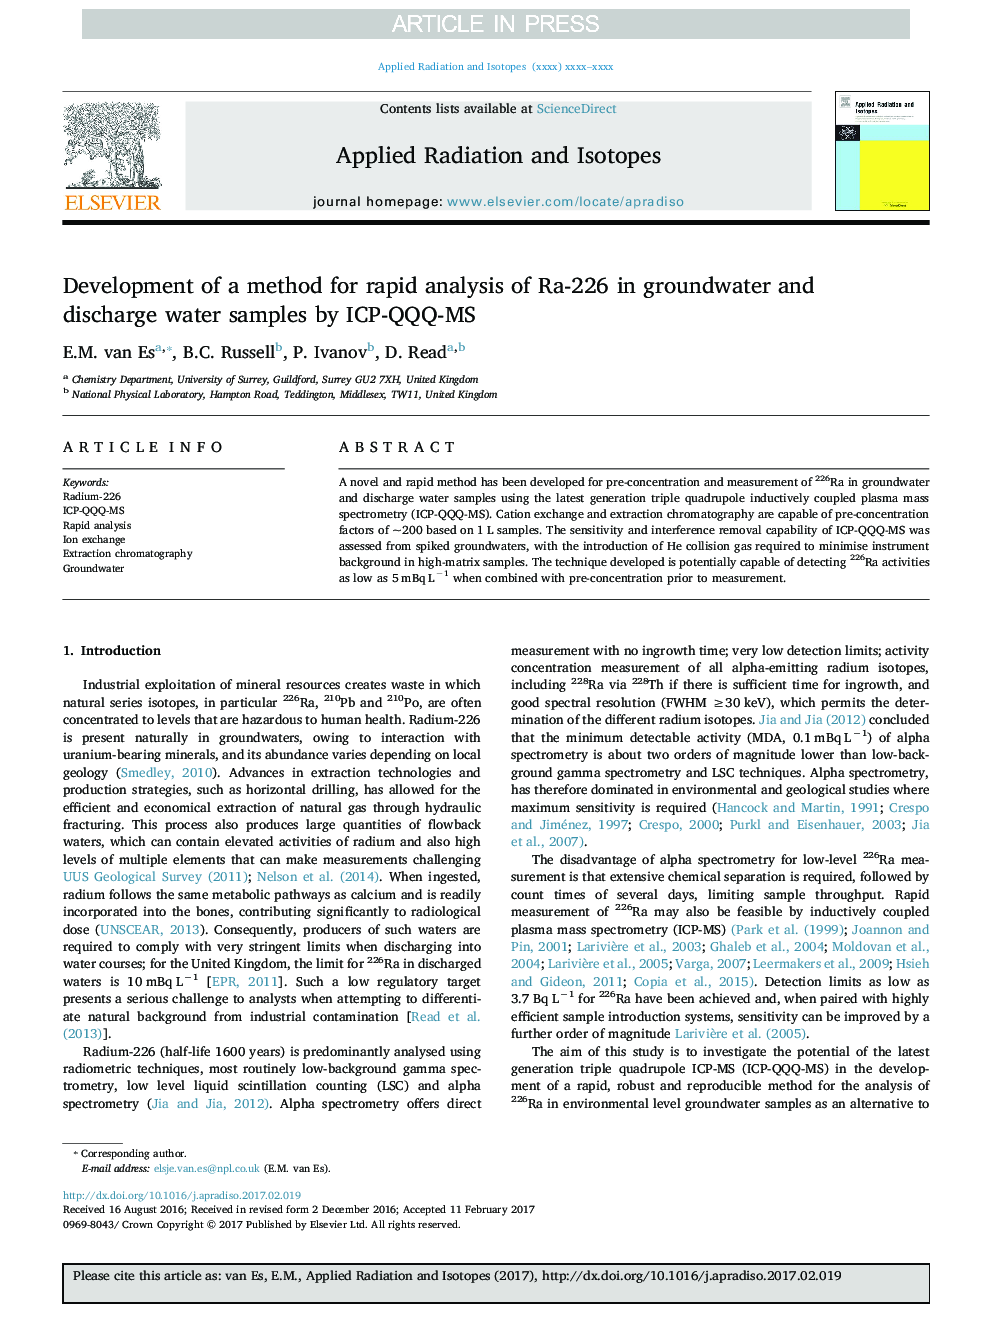 Development of a method for rapid analysis of Ra-226 in groundwater and discharge water samples by ICP-QQQ-MS